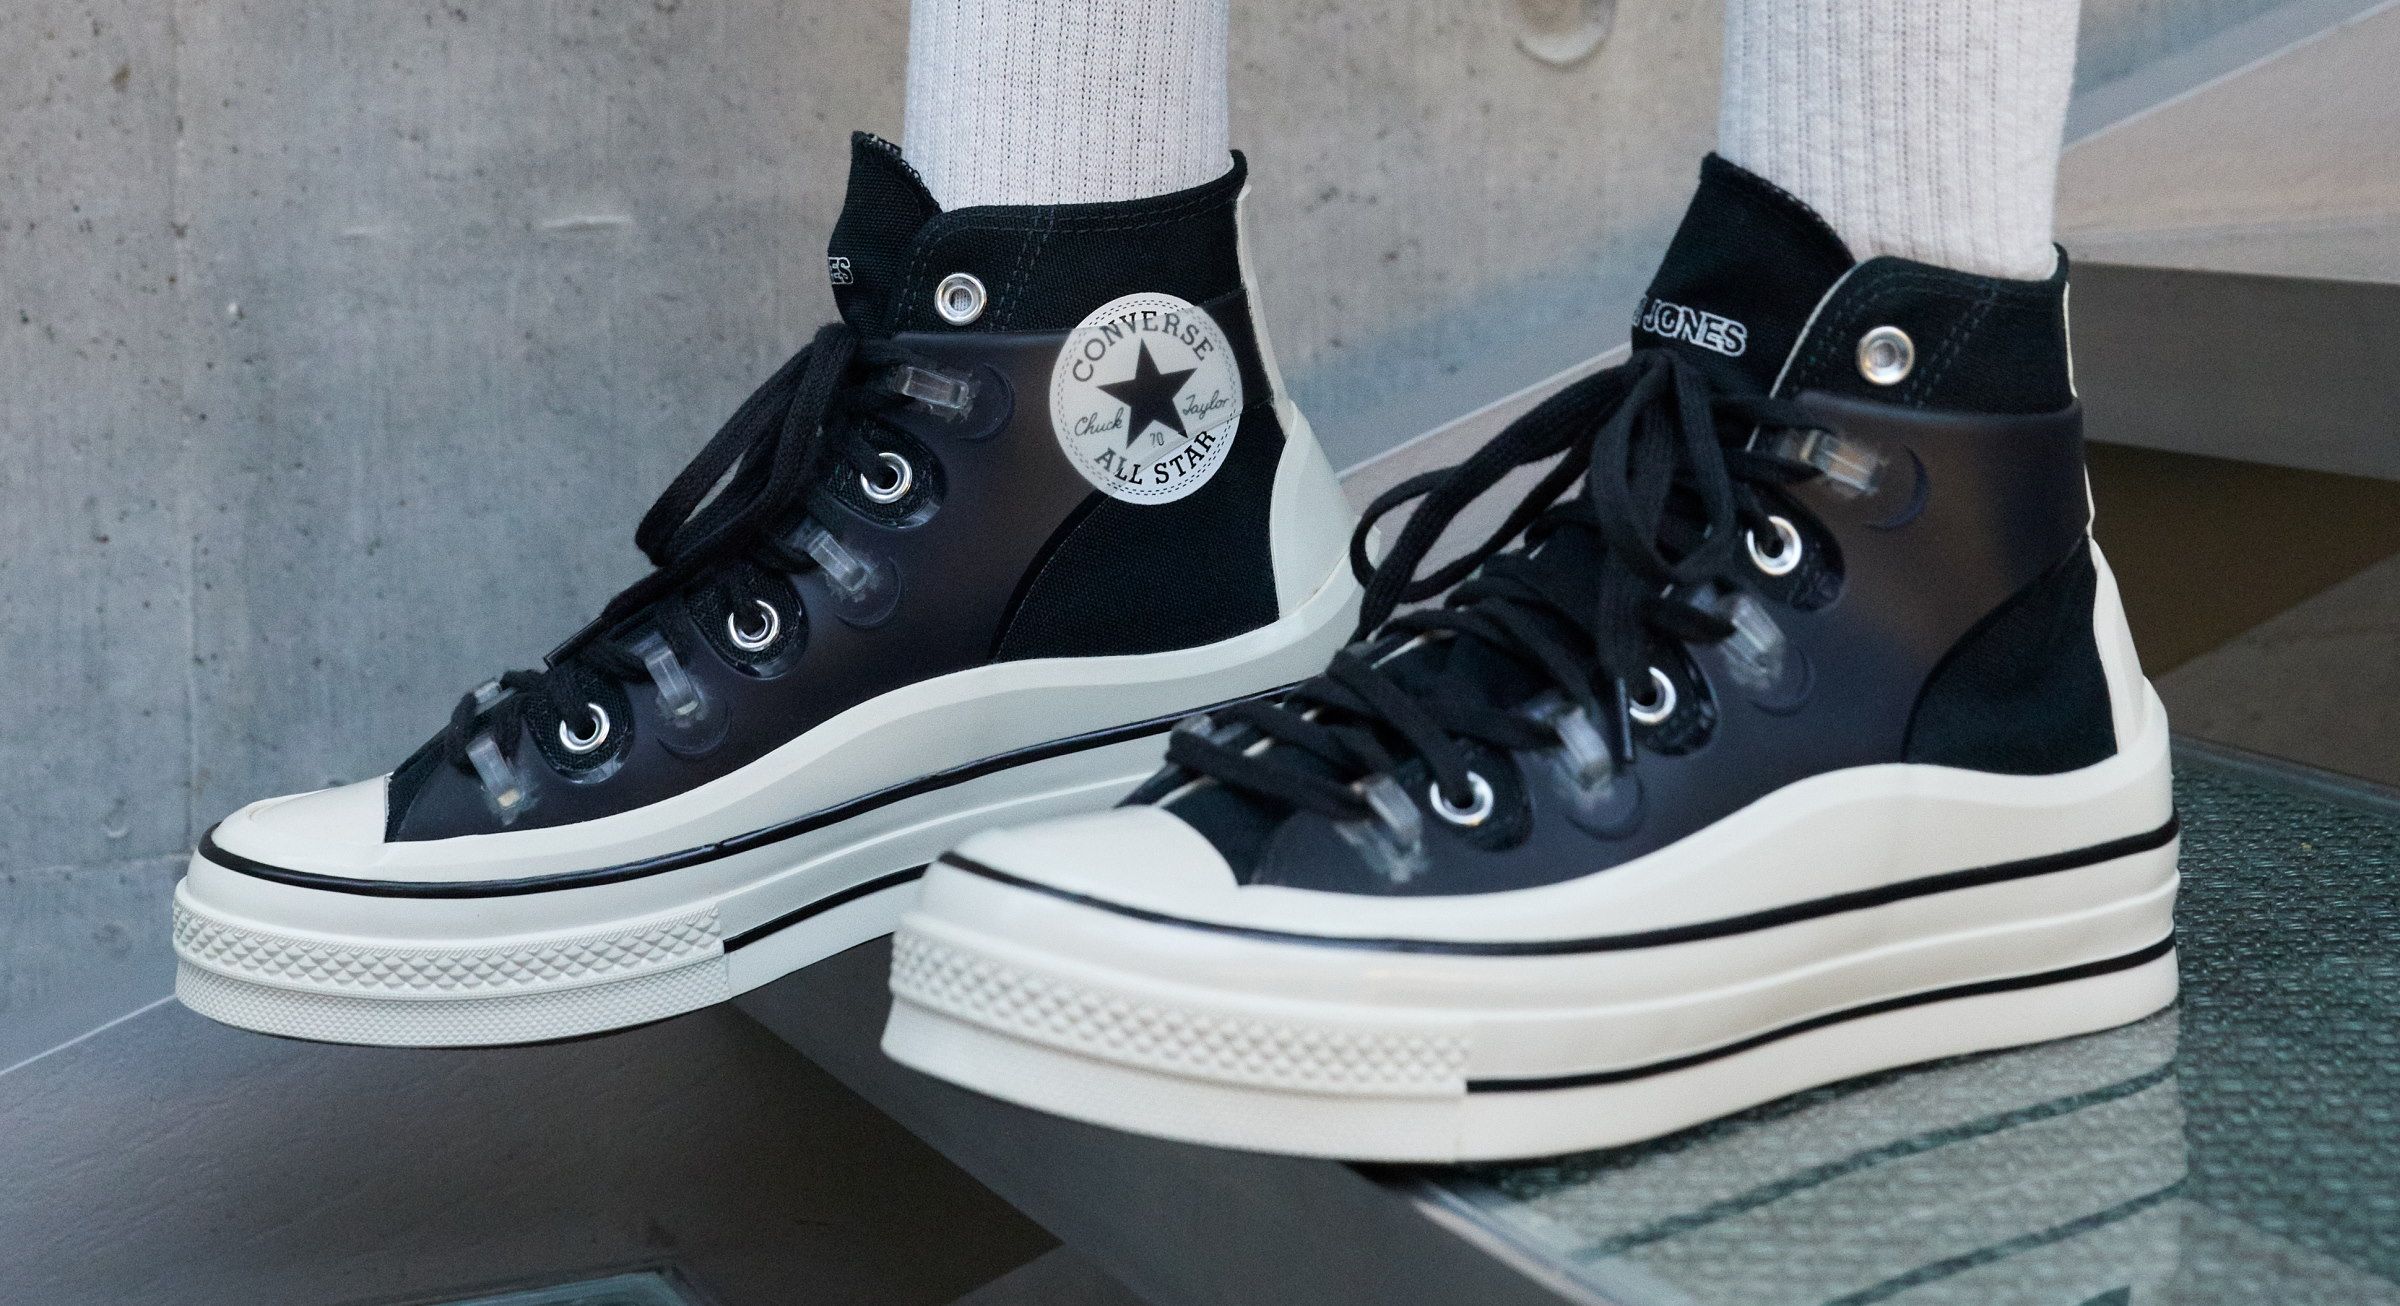 Converse x Kim Jones Collection Is Inspired By '90s UK Streetwear